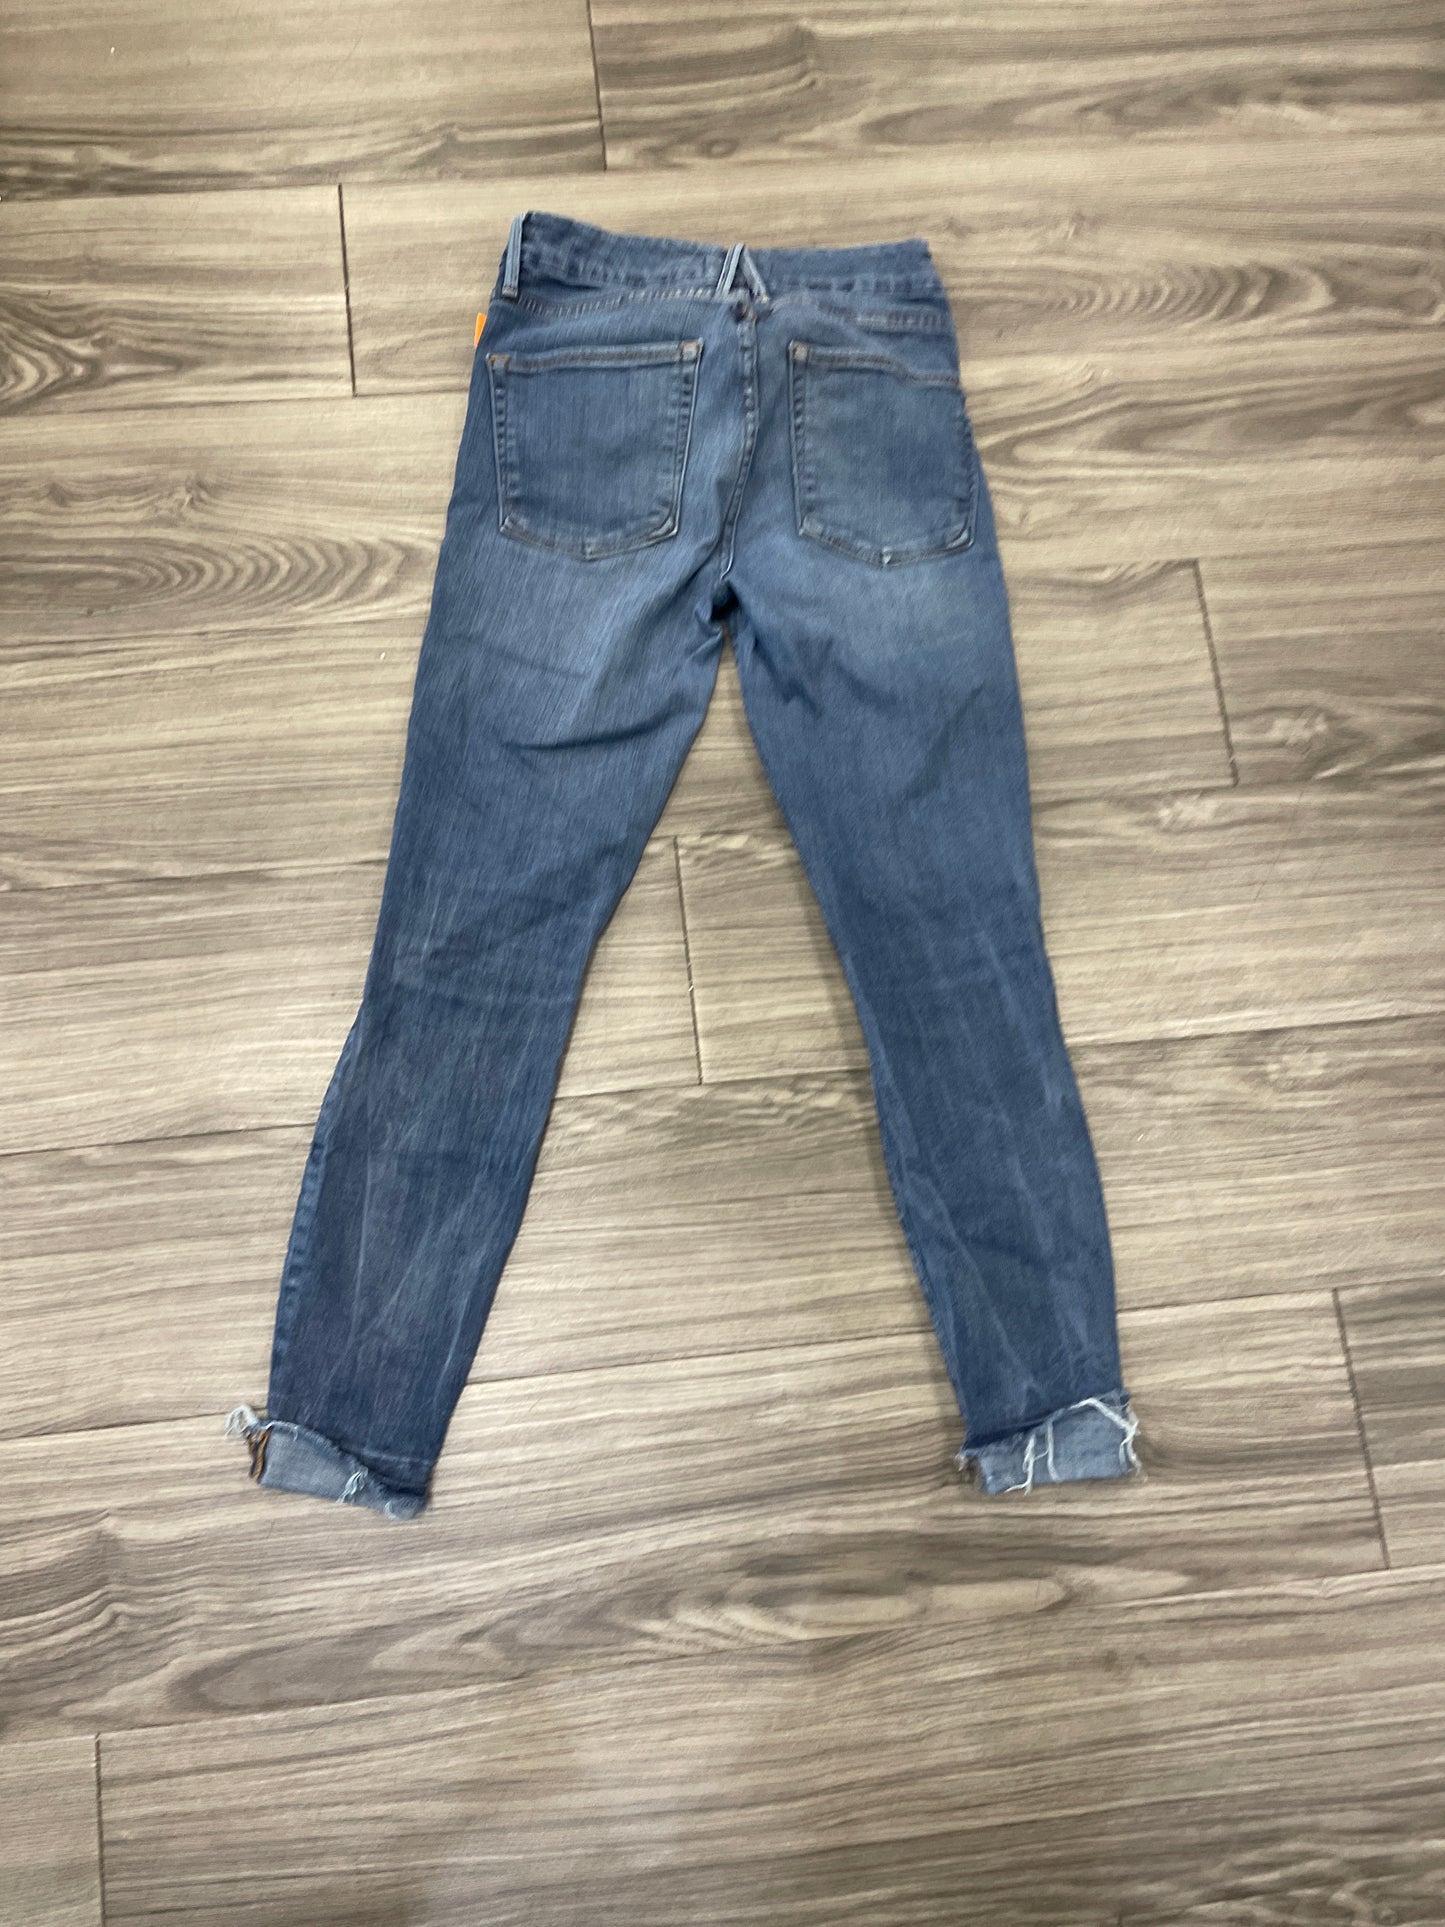 Jeans Cropped By Good American  Size: 2